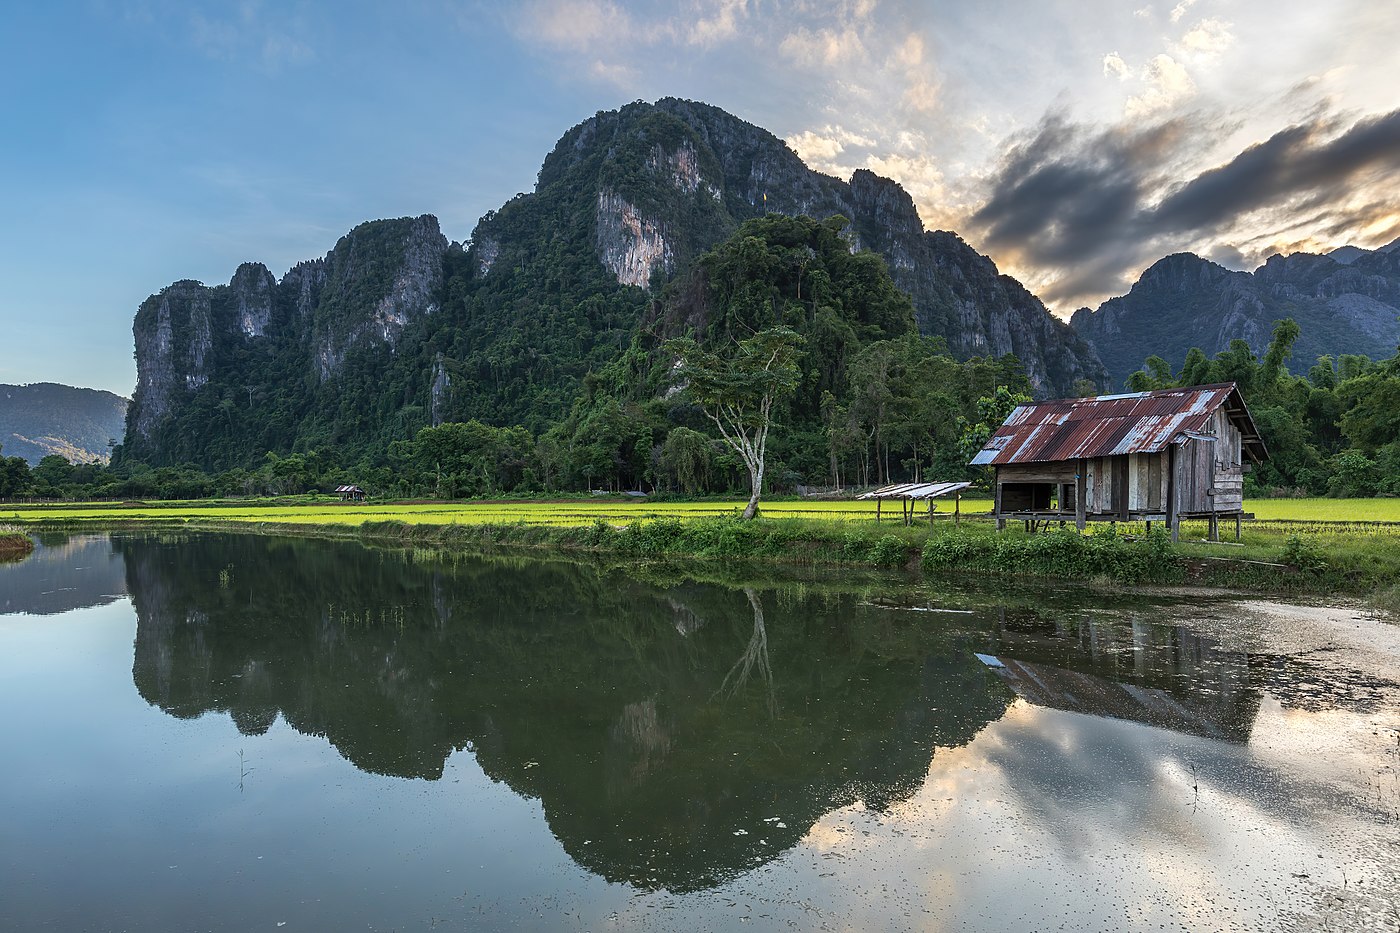 Water reflection of karst mountains, a wooden hut, trees and colorful clouds at sunset